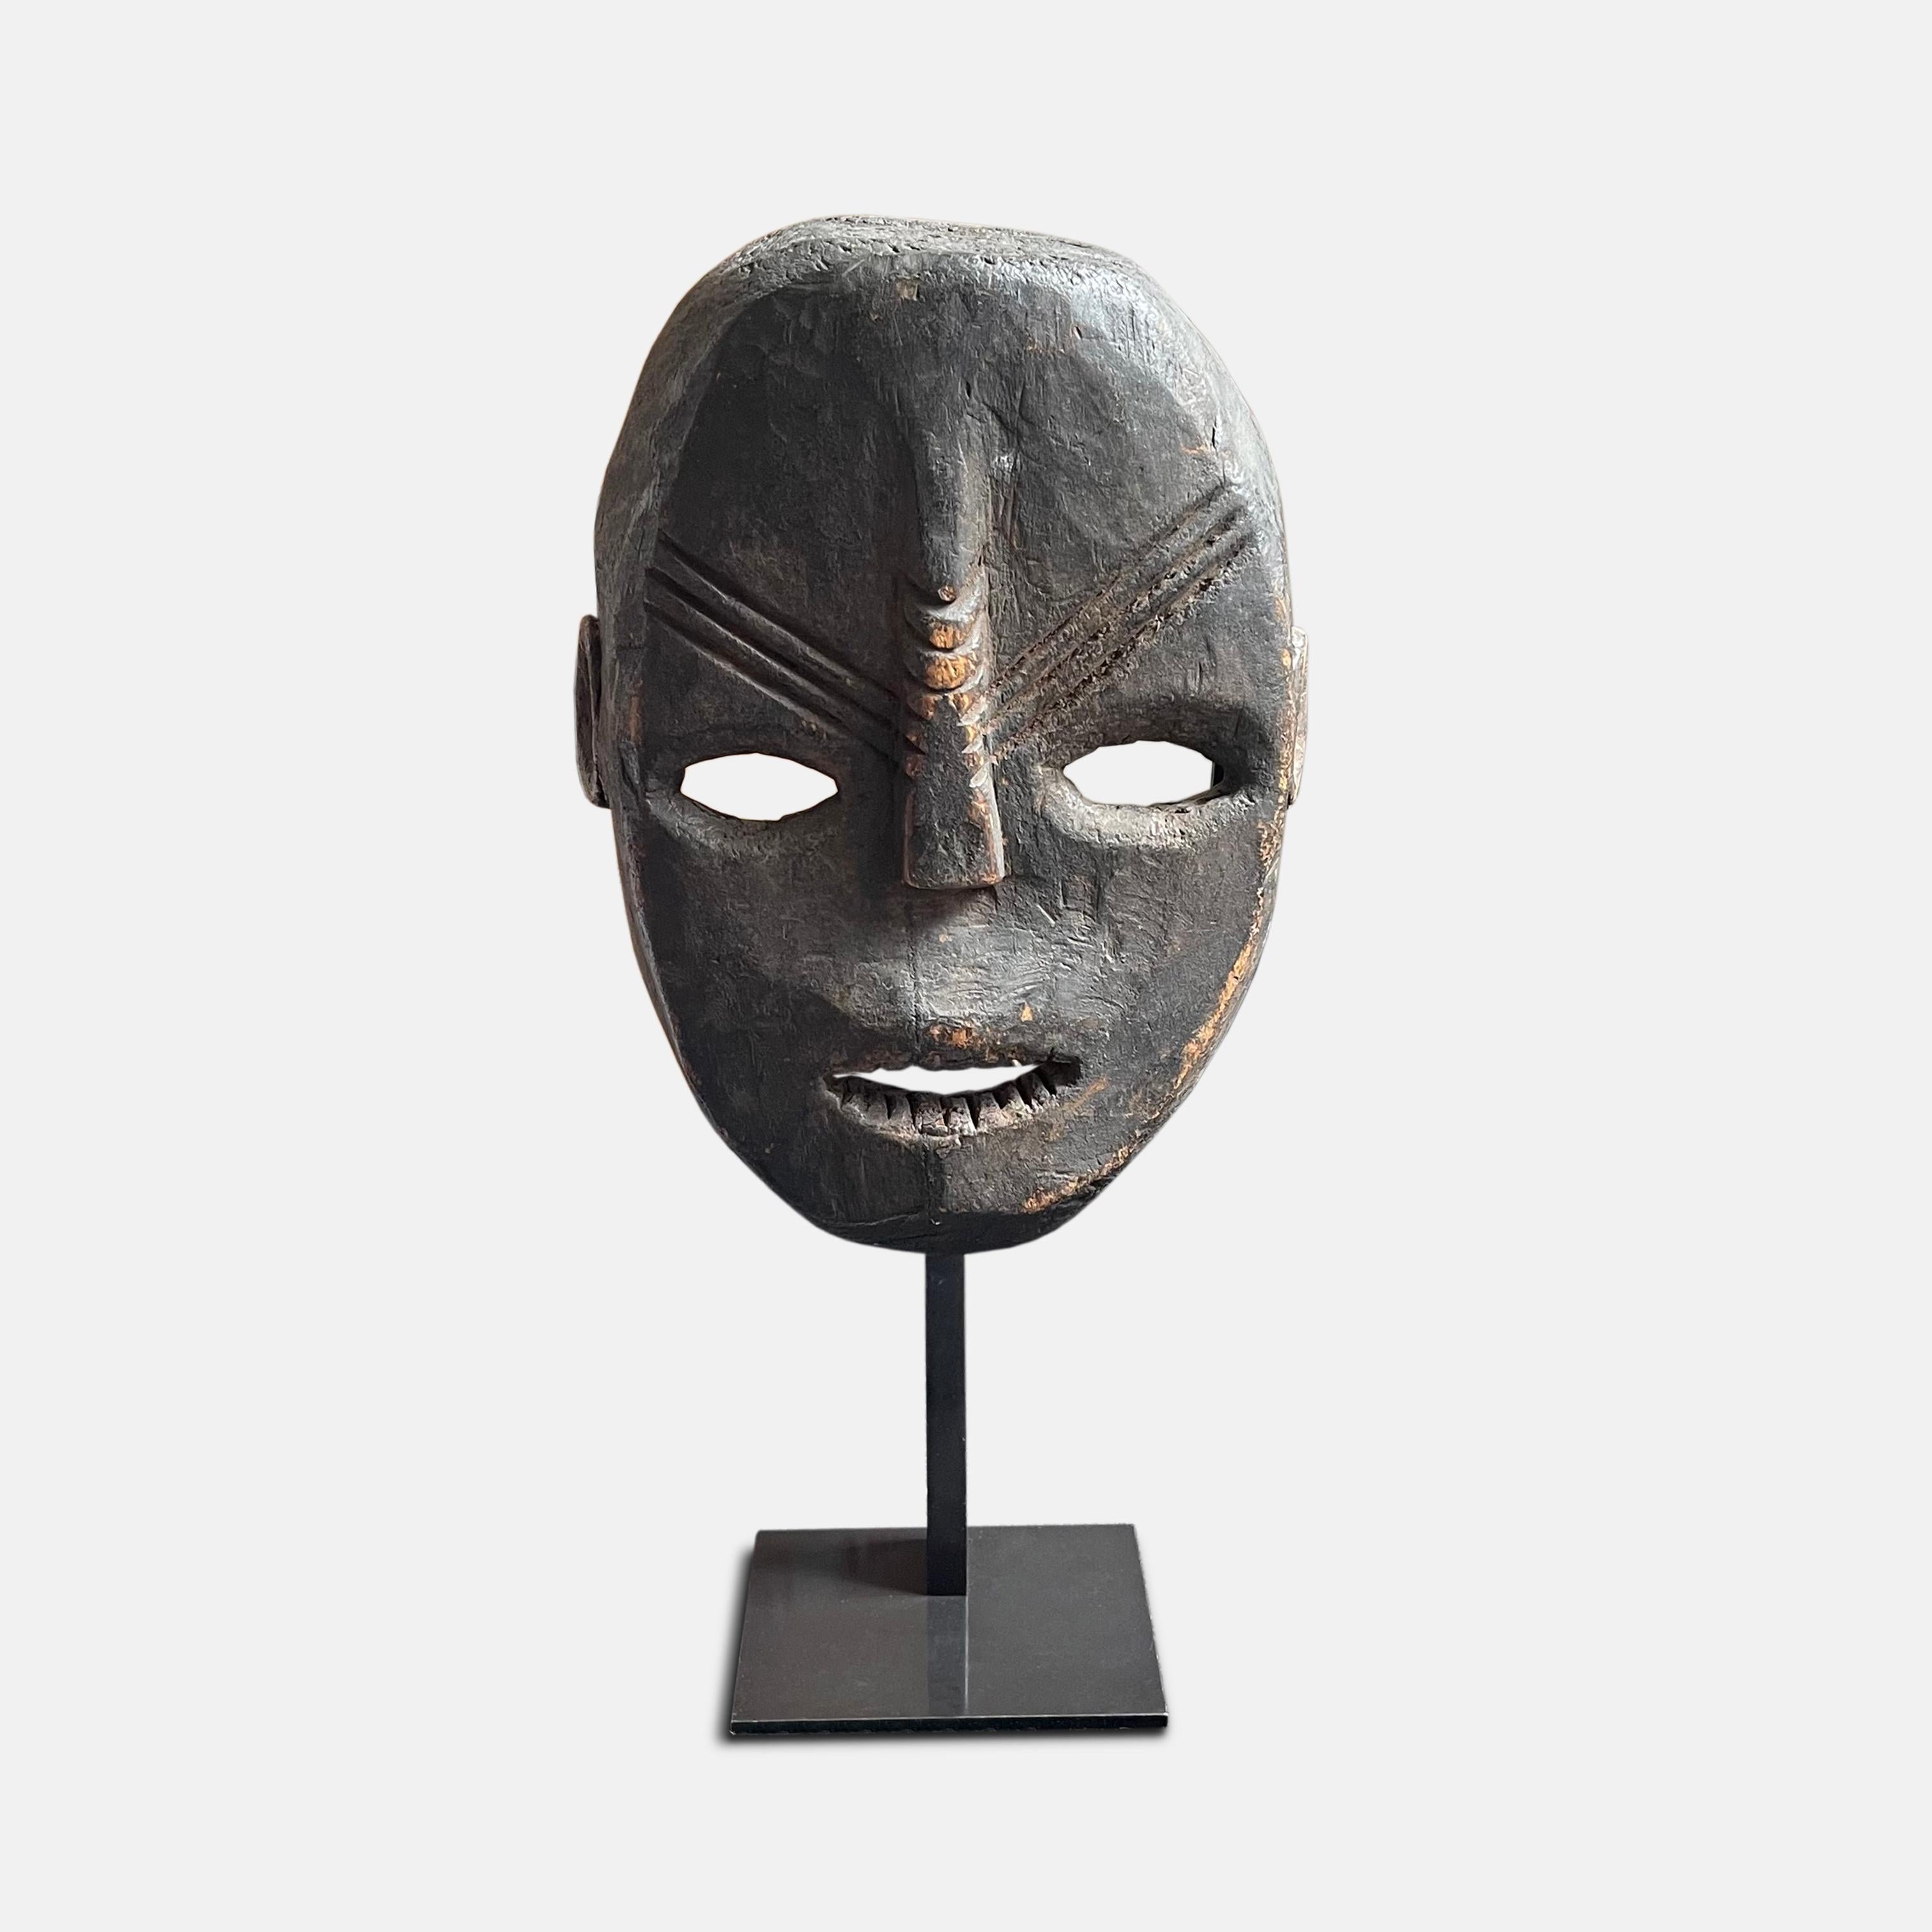 With a beautiful dark patina, this early 20th century wooden mask shows a naturalistic human face, flattened, with the forehead, open mouth and stylised teeth in light relief; the ridged, elongated nose and the diagonal ridges on the forehead are